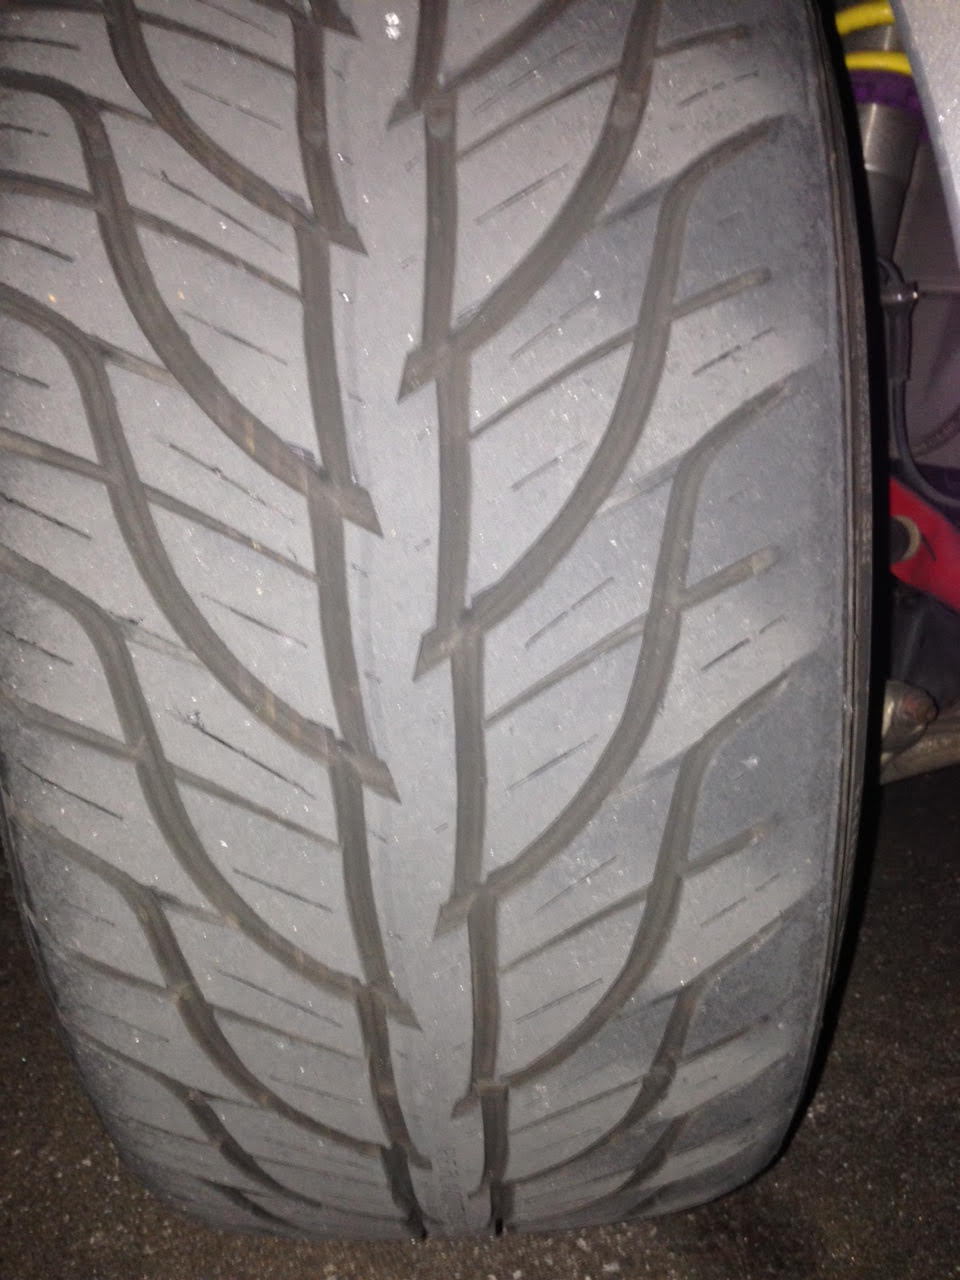 2003 Nissan 350 tire feathering